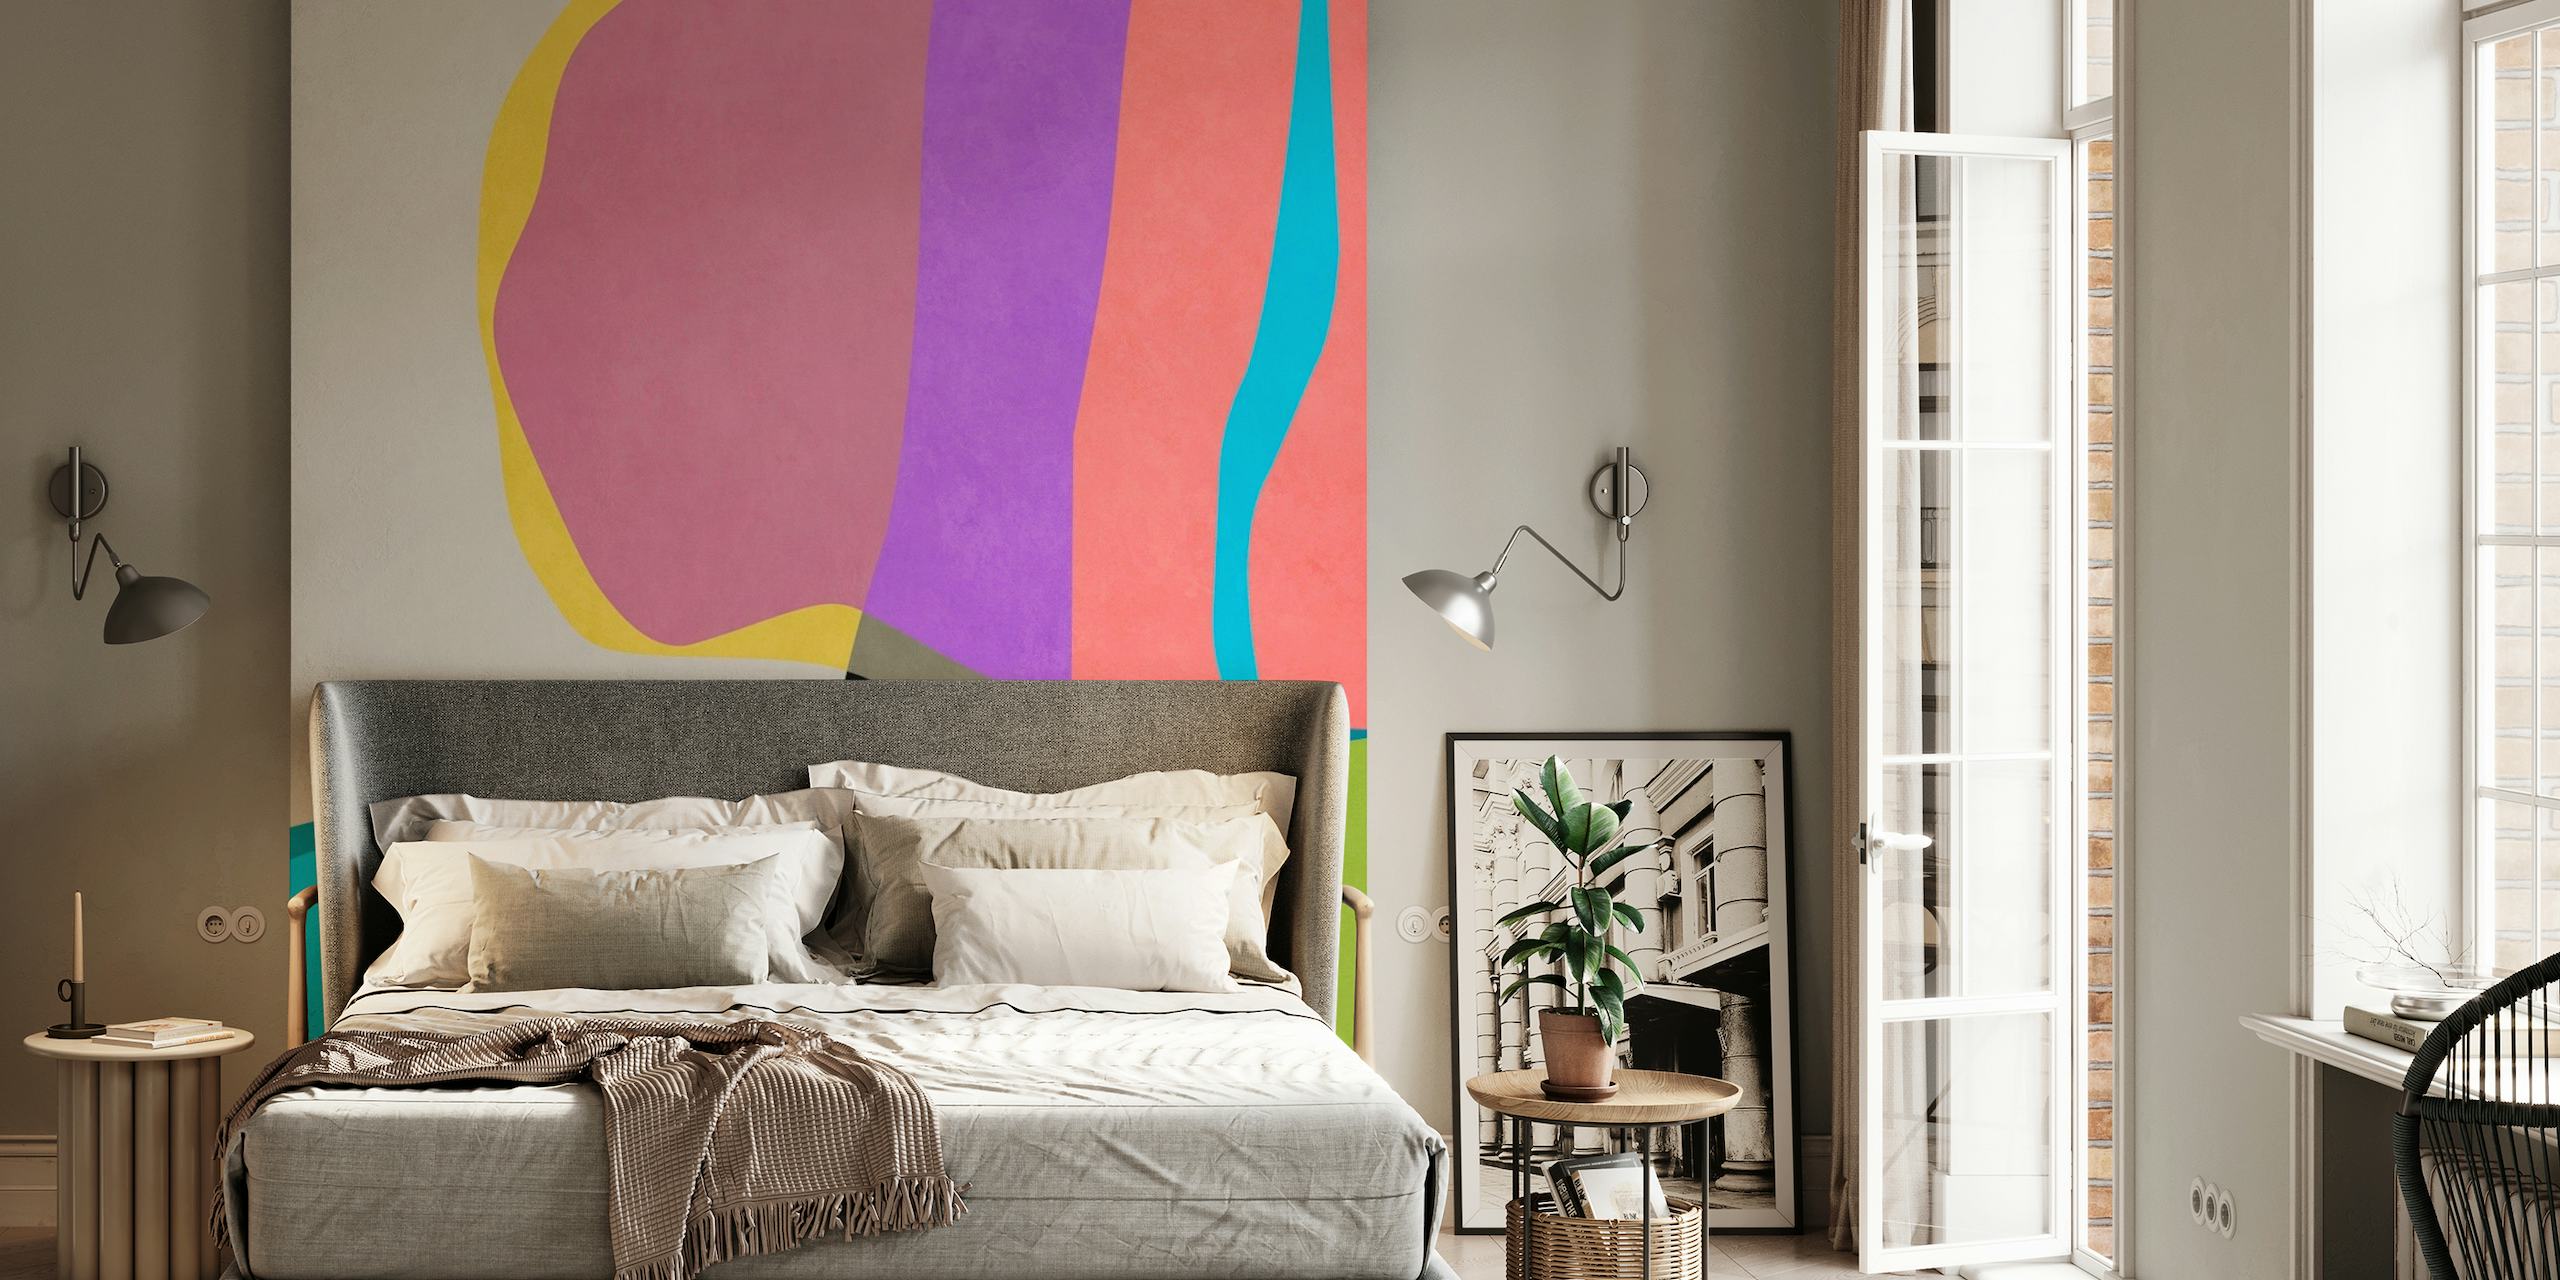 Abstract wall mural with vibrant colors and fluid shapes creating a sense of movement